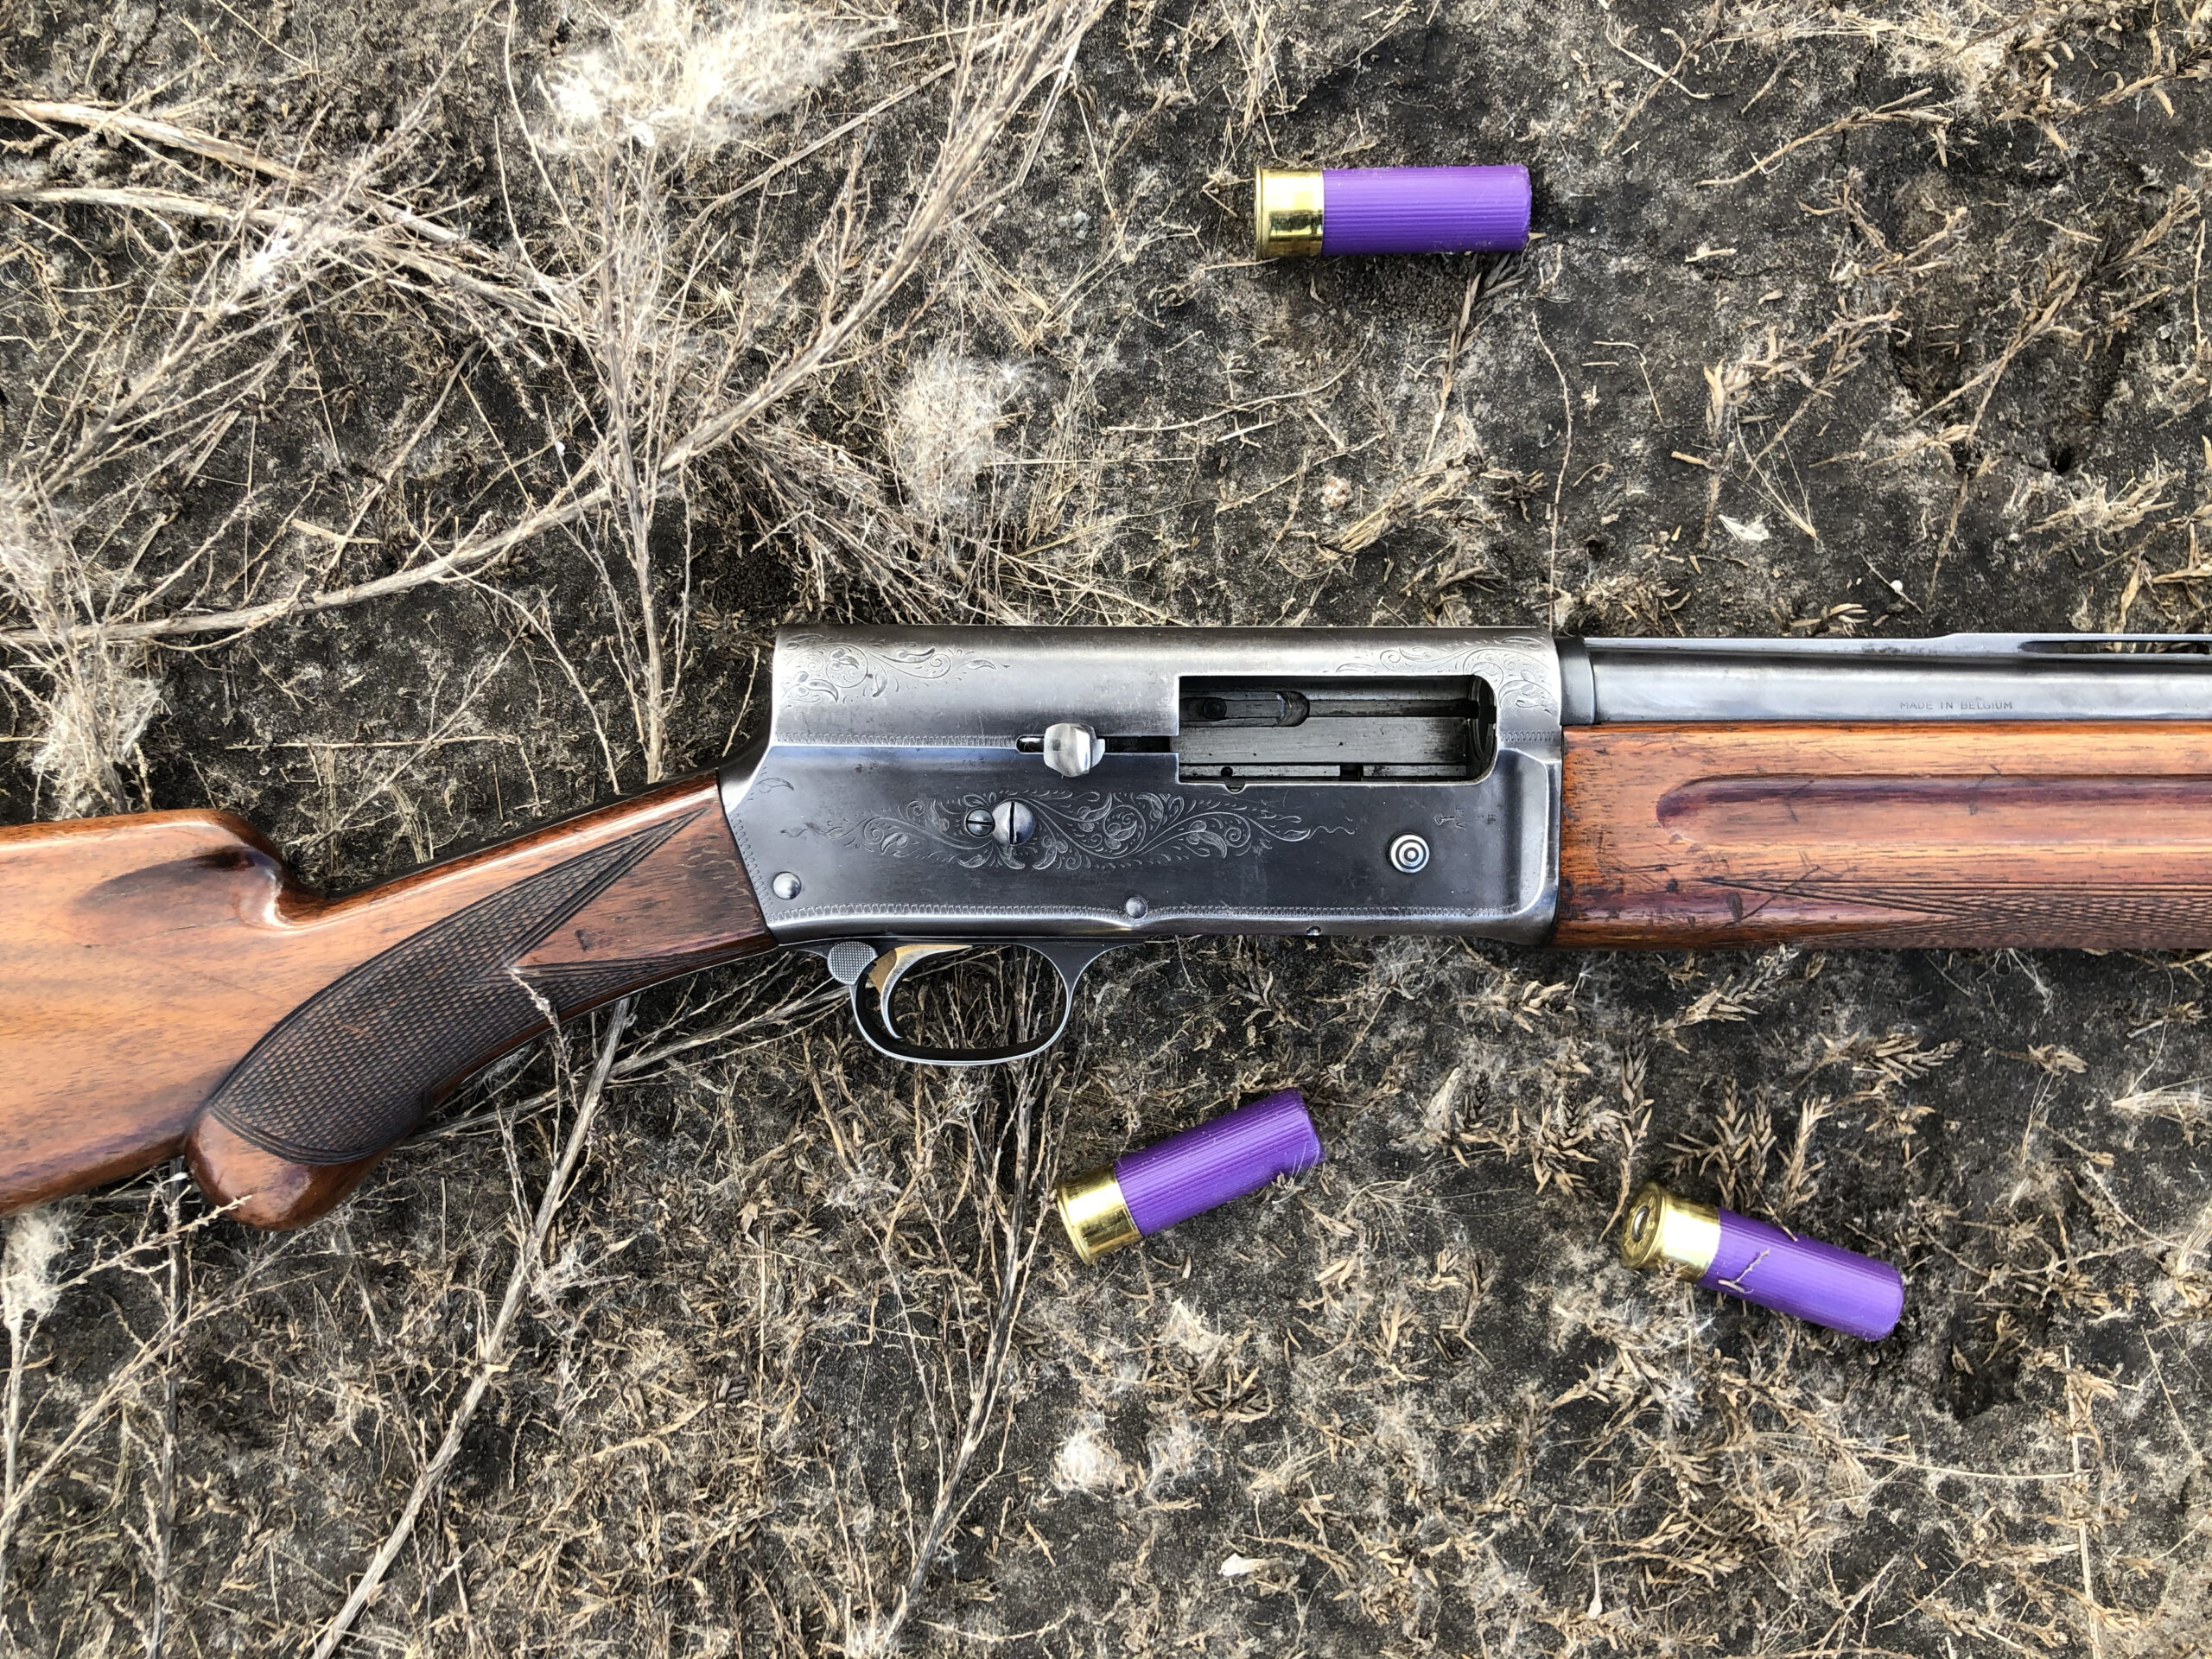 Rise of the Sub-Gauges: Why Small-Bore Shotguns Are Making a Comeback